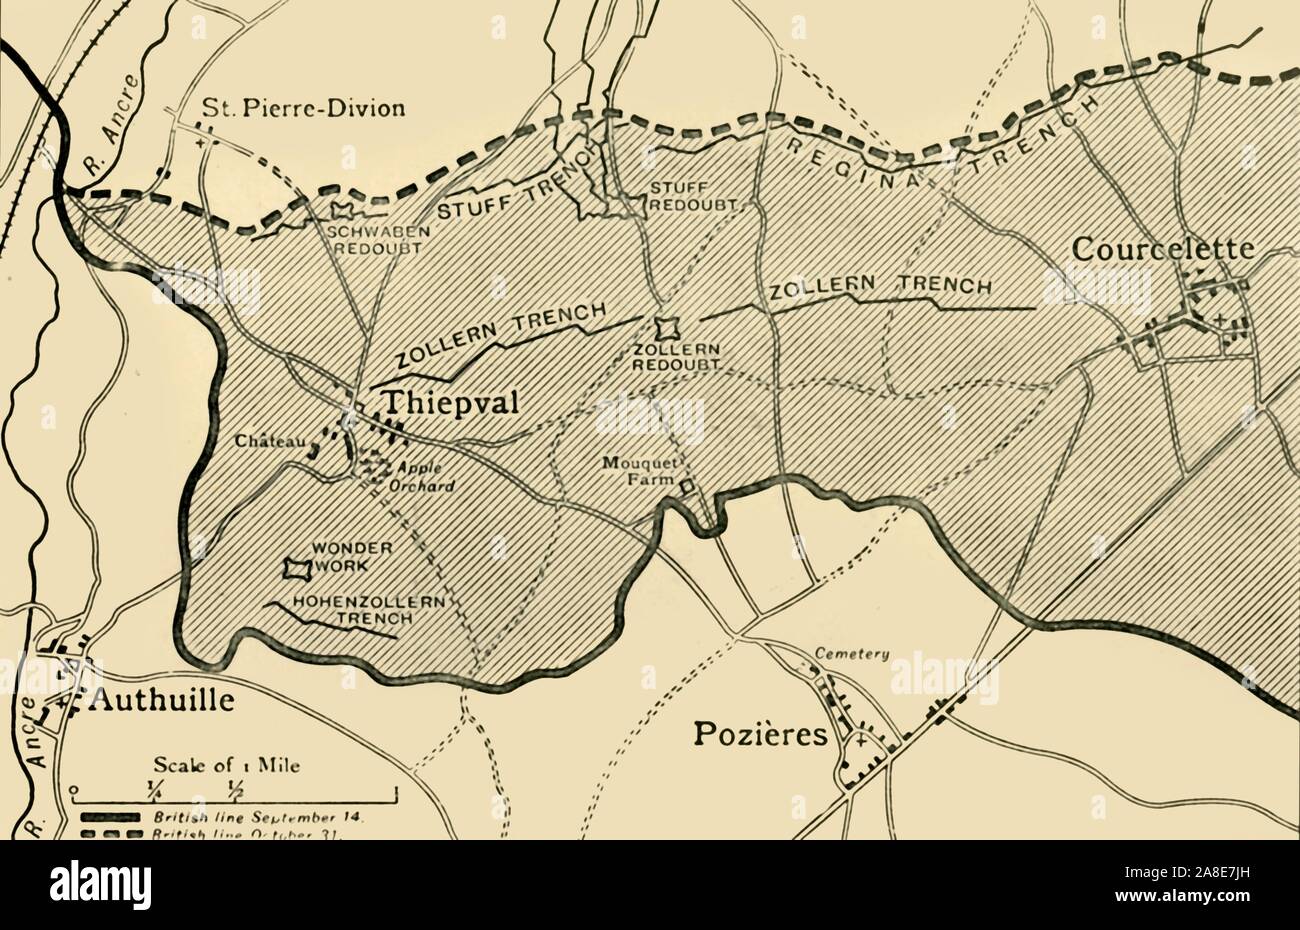 'Map showing approximately the area gained on the Thiepval Ridge between September 14 and October 31, 1916', (c1920). The British line in northern France during the Battle of the Somme, First World War. From &quot;The Great World War: A History&quot;, Volume VI, edited by Frank A Mumby. [The Gresham Publishing Company Ltd, London, c1920] Stock Photo